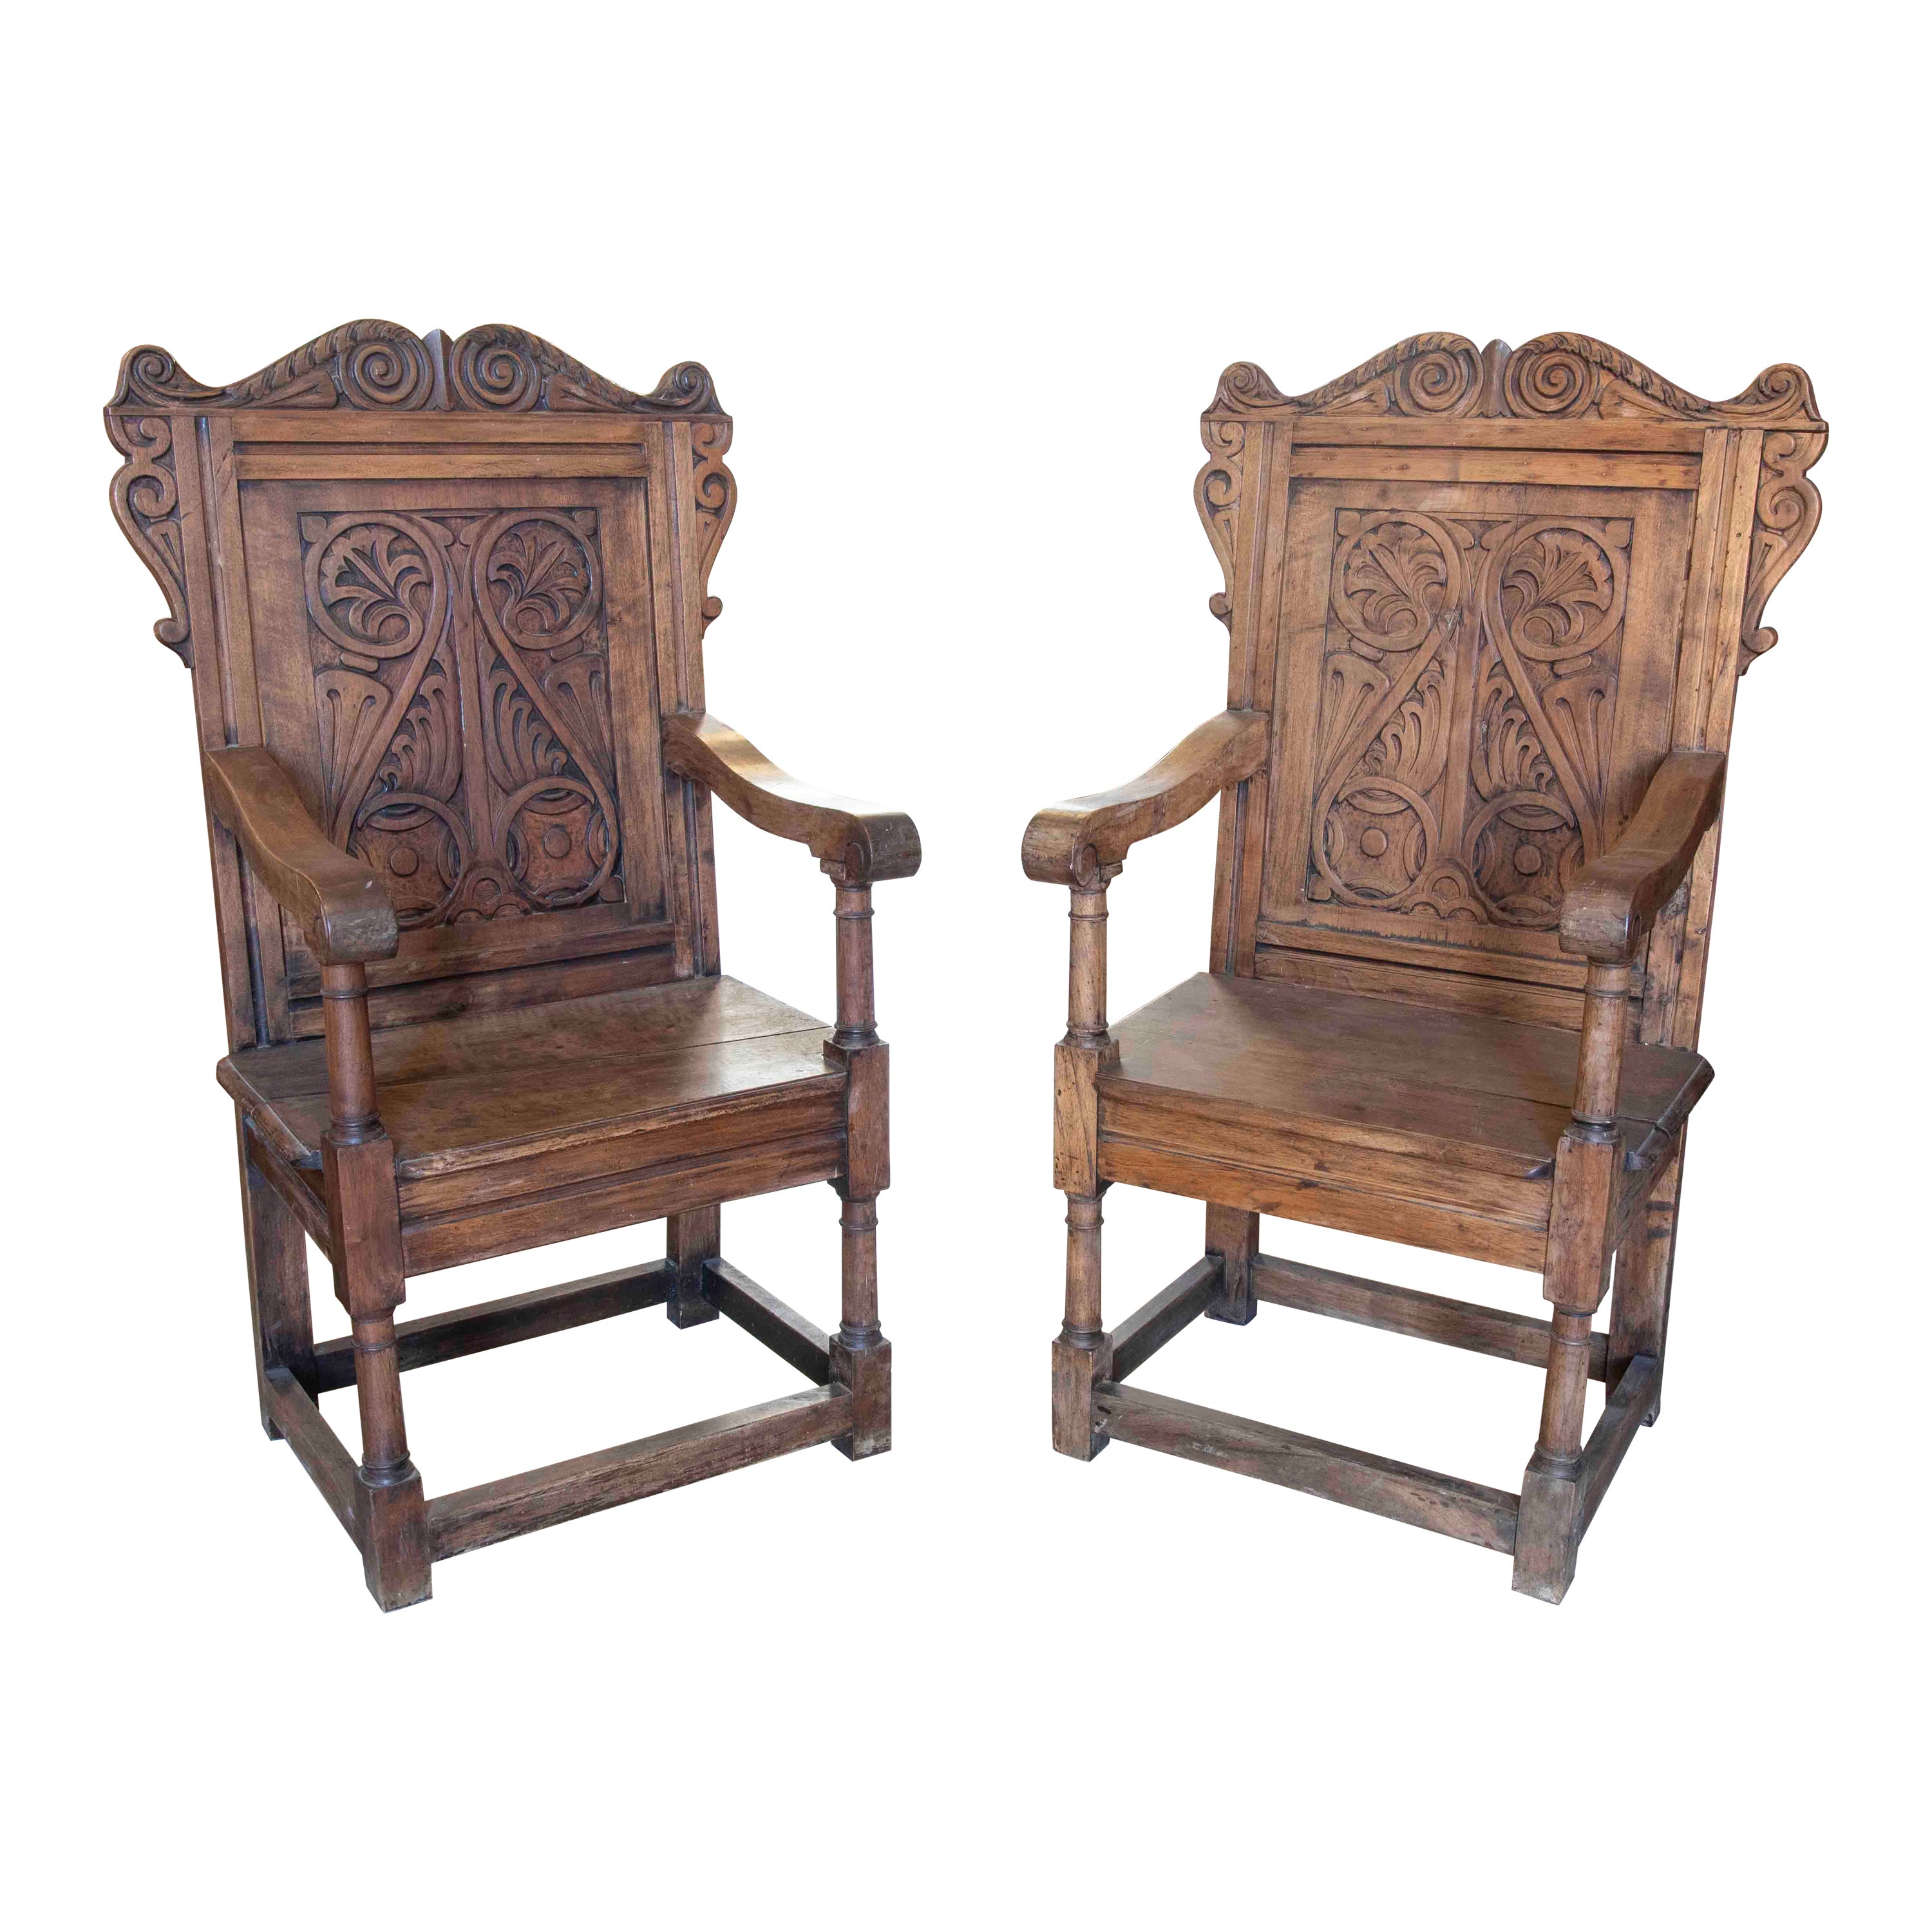 English Pair of Wooden Armchairs with Carved Vegetable Decoration